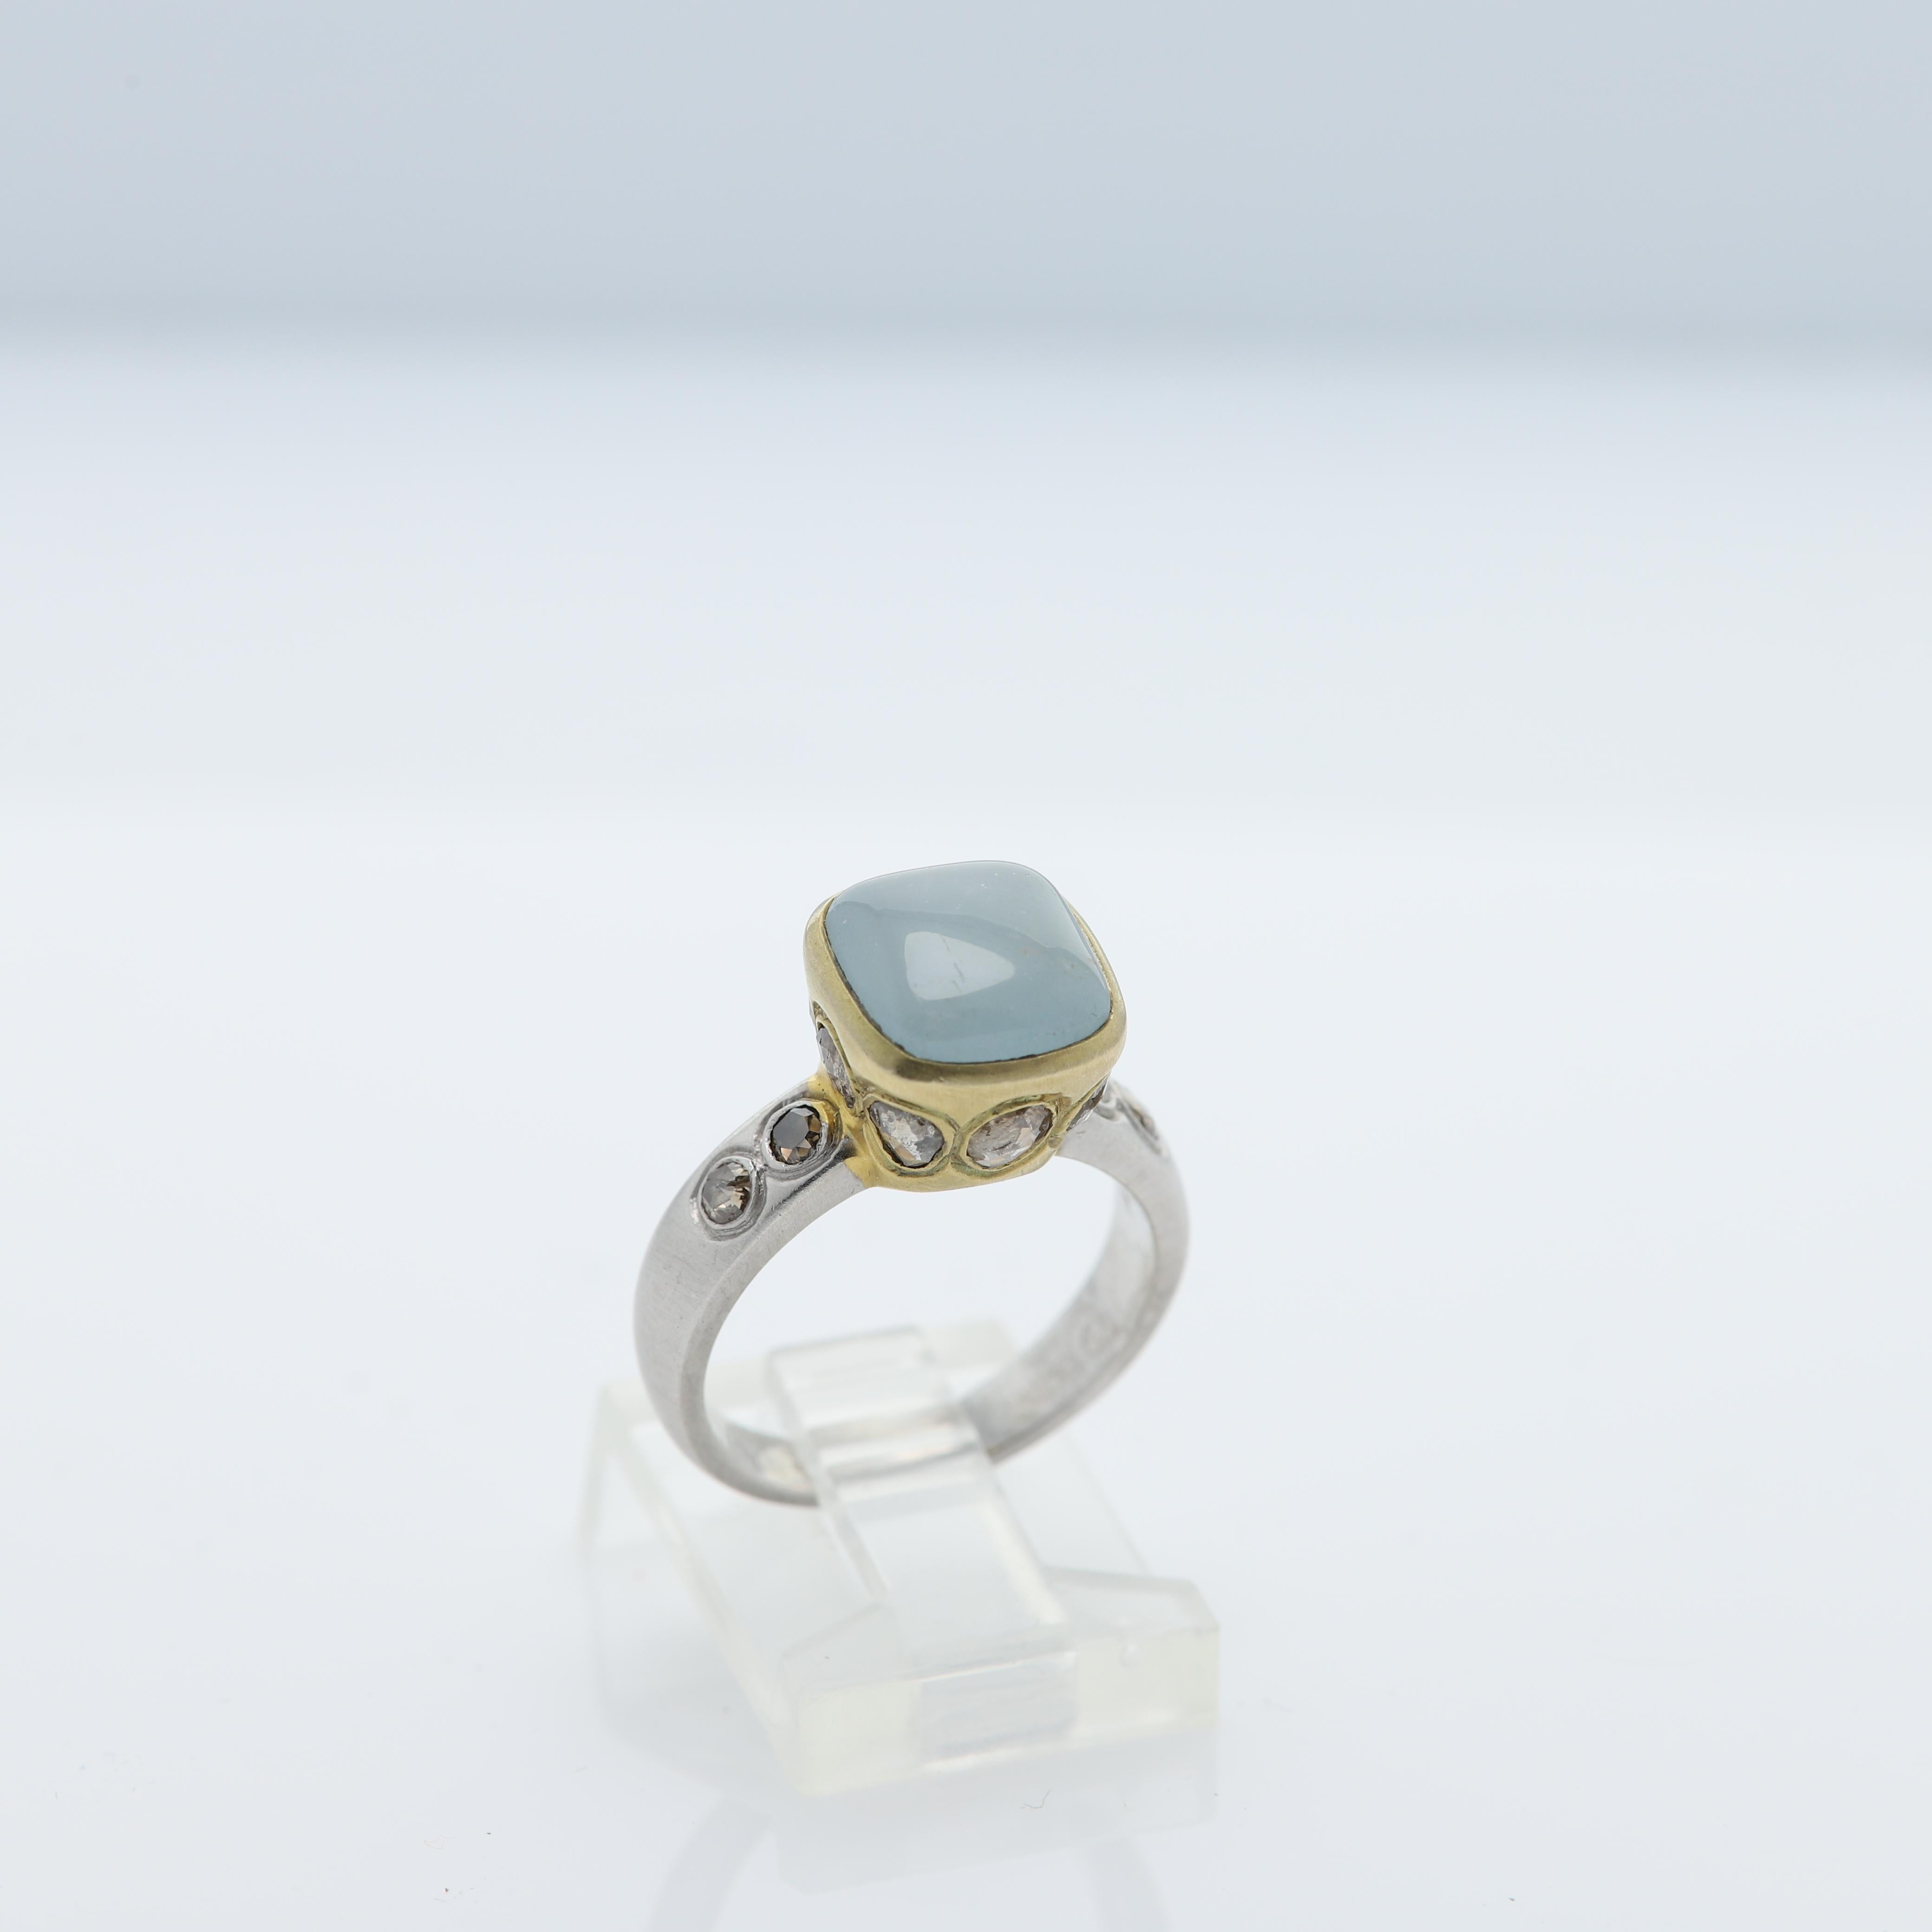 Vintage Aquamarine & Old Cut Diamonds - Hand Made in Italy.
18k Two Tone Yellow & White 7.30 grams - mat finish (not shiney gold)
Aquamarine 3.90 carat approx size 9 x 10 mm
Old cut Light Brown Diamonds 1.20 carat
Finger size 6.5
All Stones are